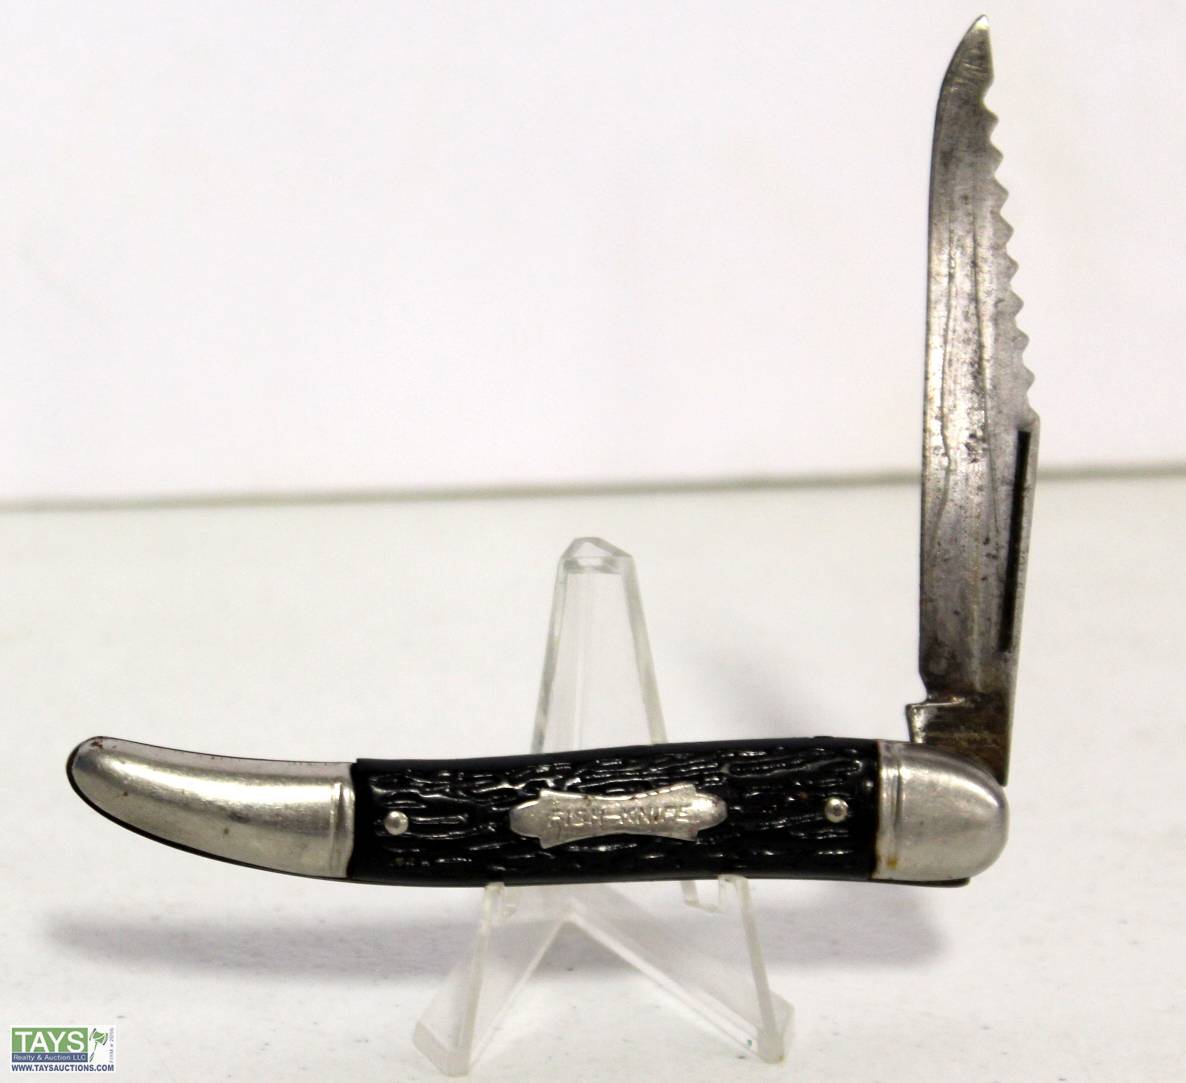 Sold at Auction: Vintage Fish Knife Knives